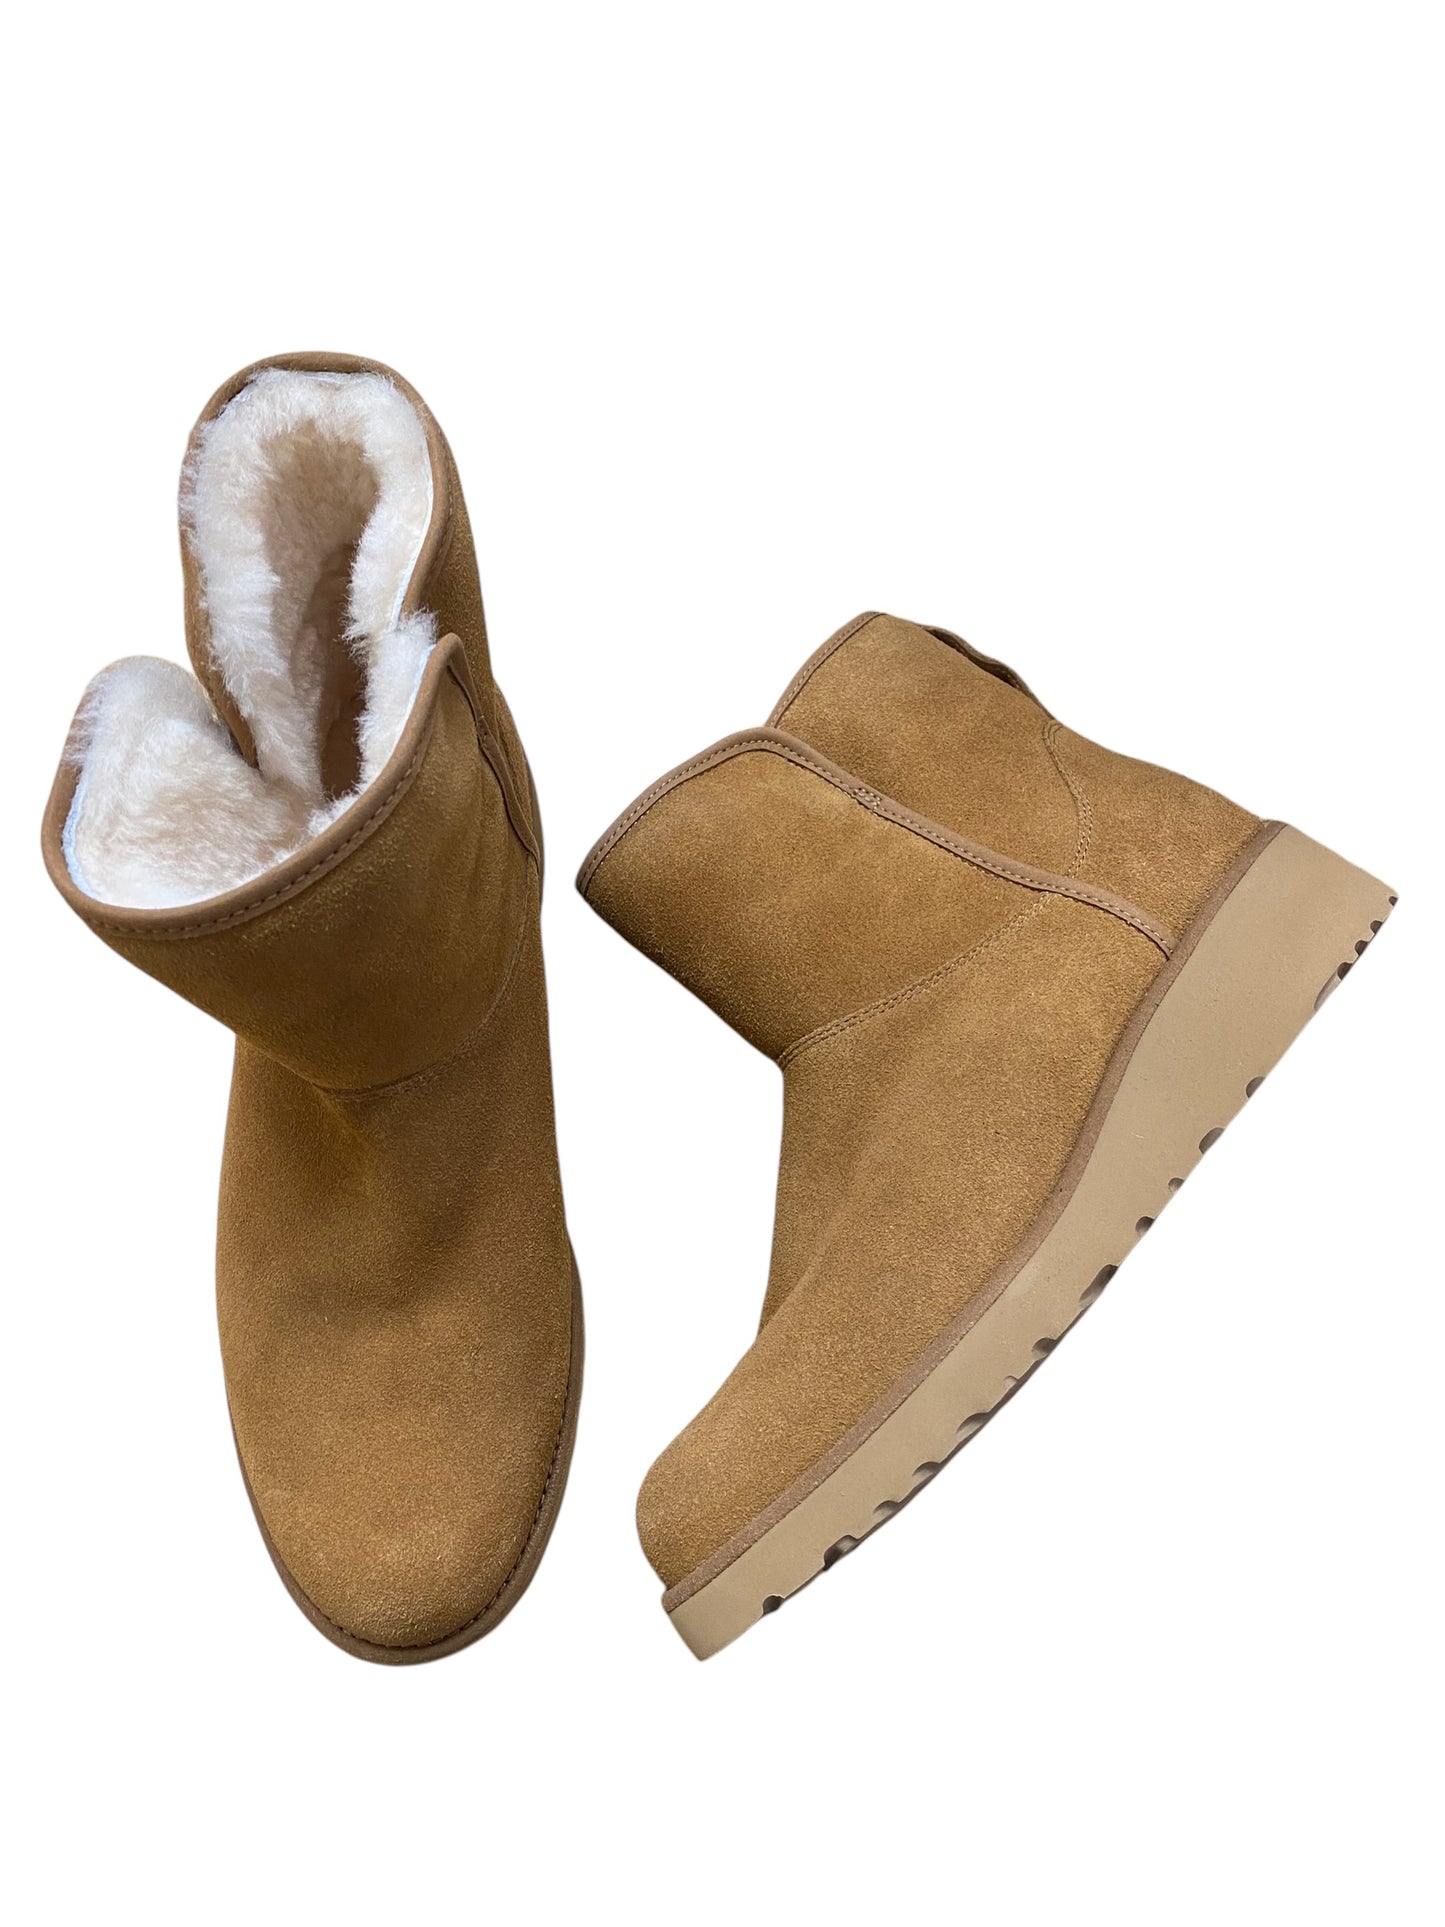 Boots Ankle Flats By Ugg  Size: 9.5